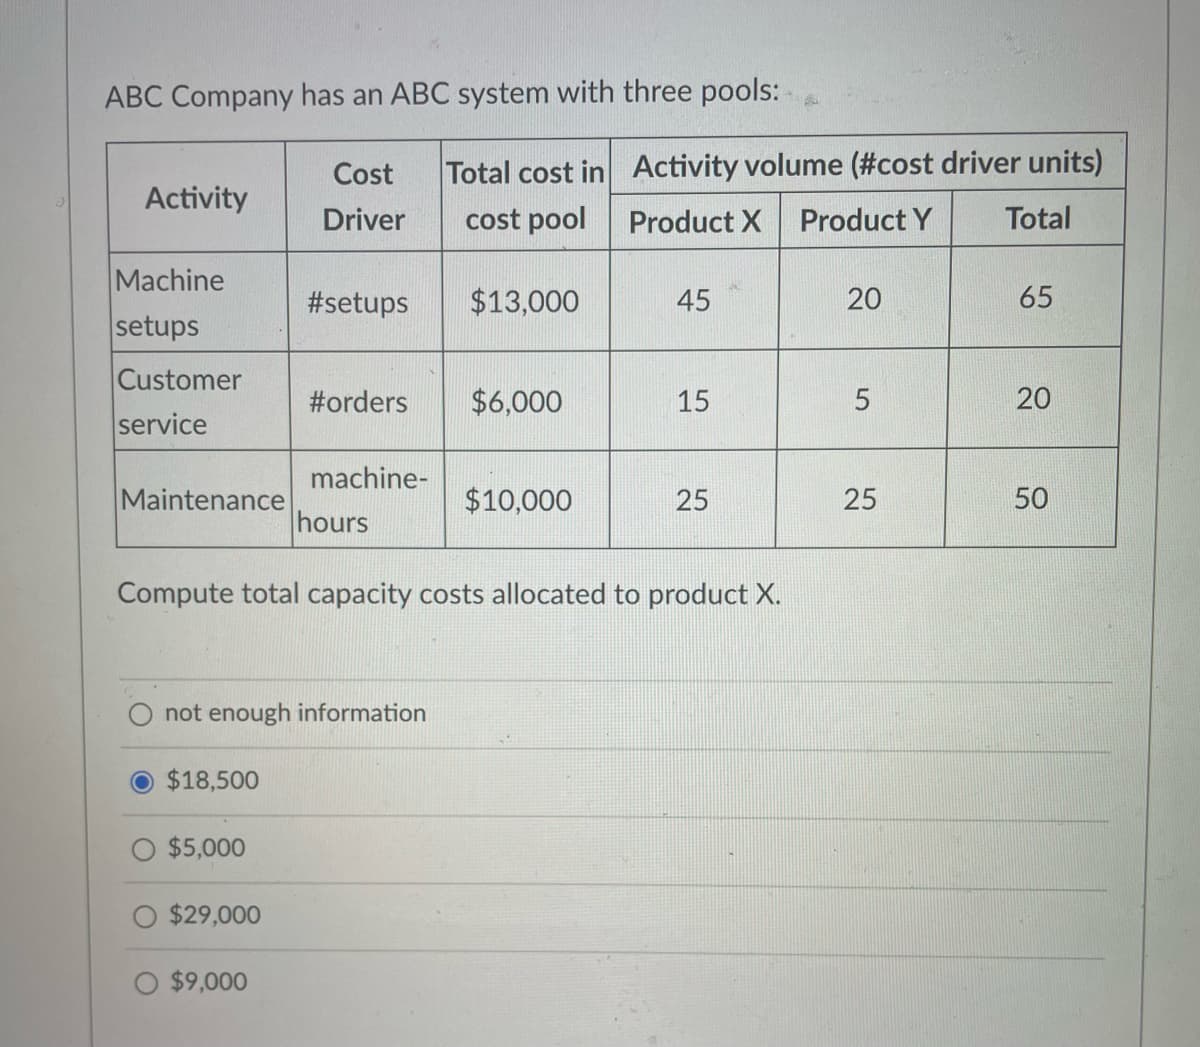 ABC Company has an ABC system with three pools:
Total cost in
cost pool
Activity
Machine
setups
Customer
service
Maintenance
$18,500
$5,000
Cost
Driver
$29,000
#setups
O $9,000
#orders
not enough information
machine-
hours
$13,000
$6,000
$10,000
Compute total capacity costs allocated to product X.
Activity volume (#cost driver units)
Product X Product Y
Total
45
15
25
20
5
25
65
20
50